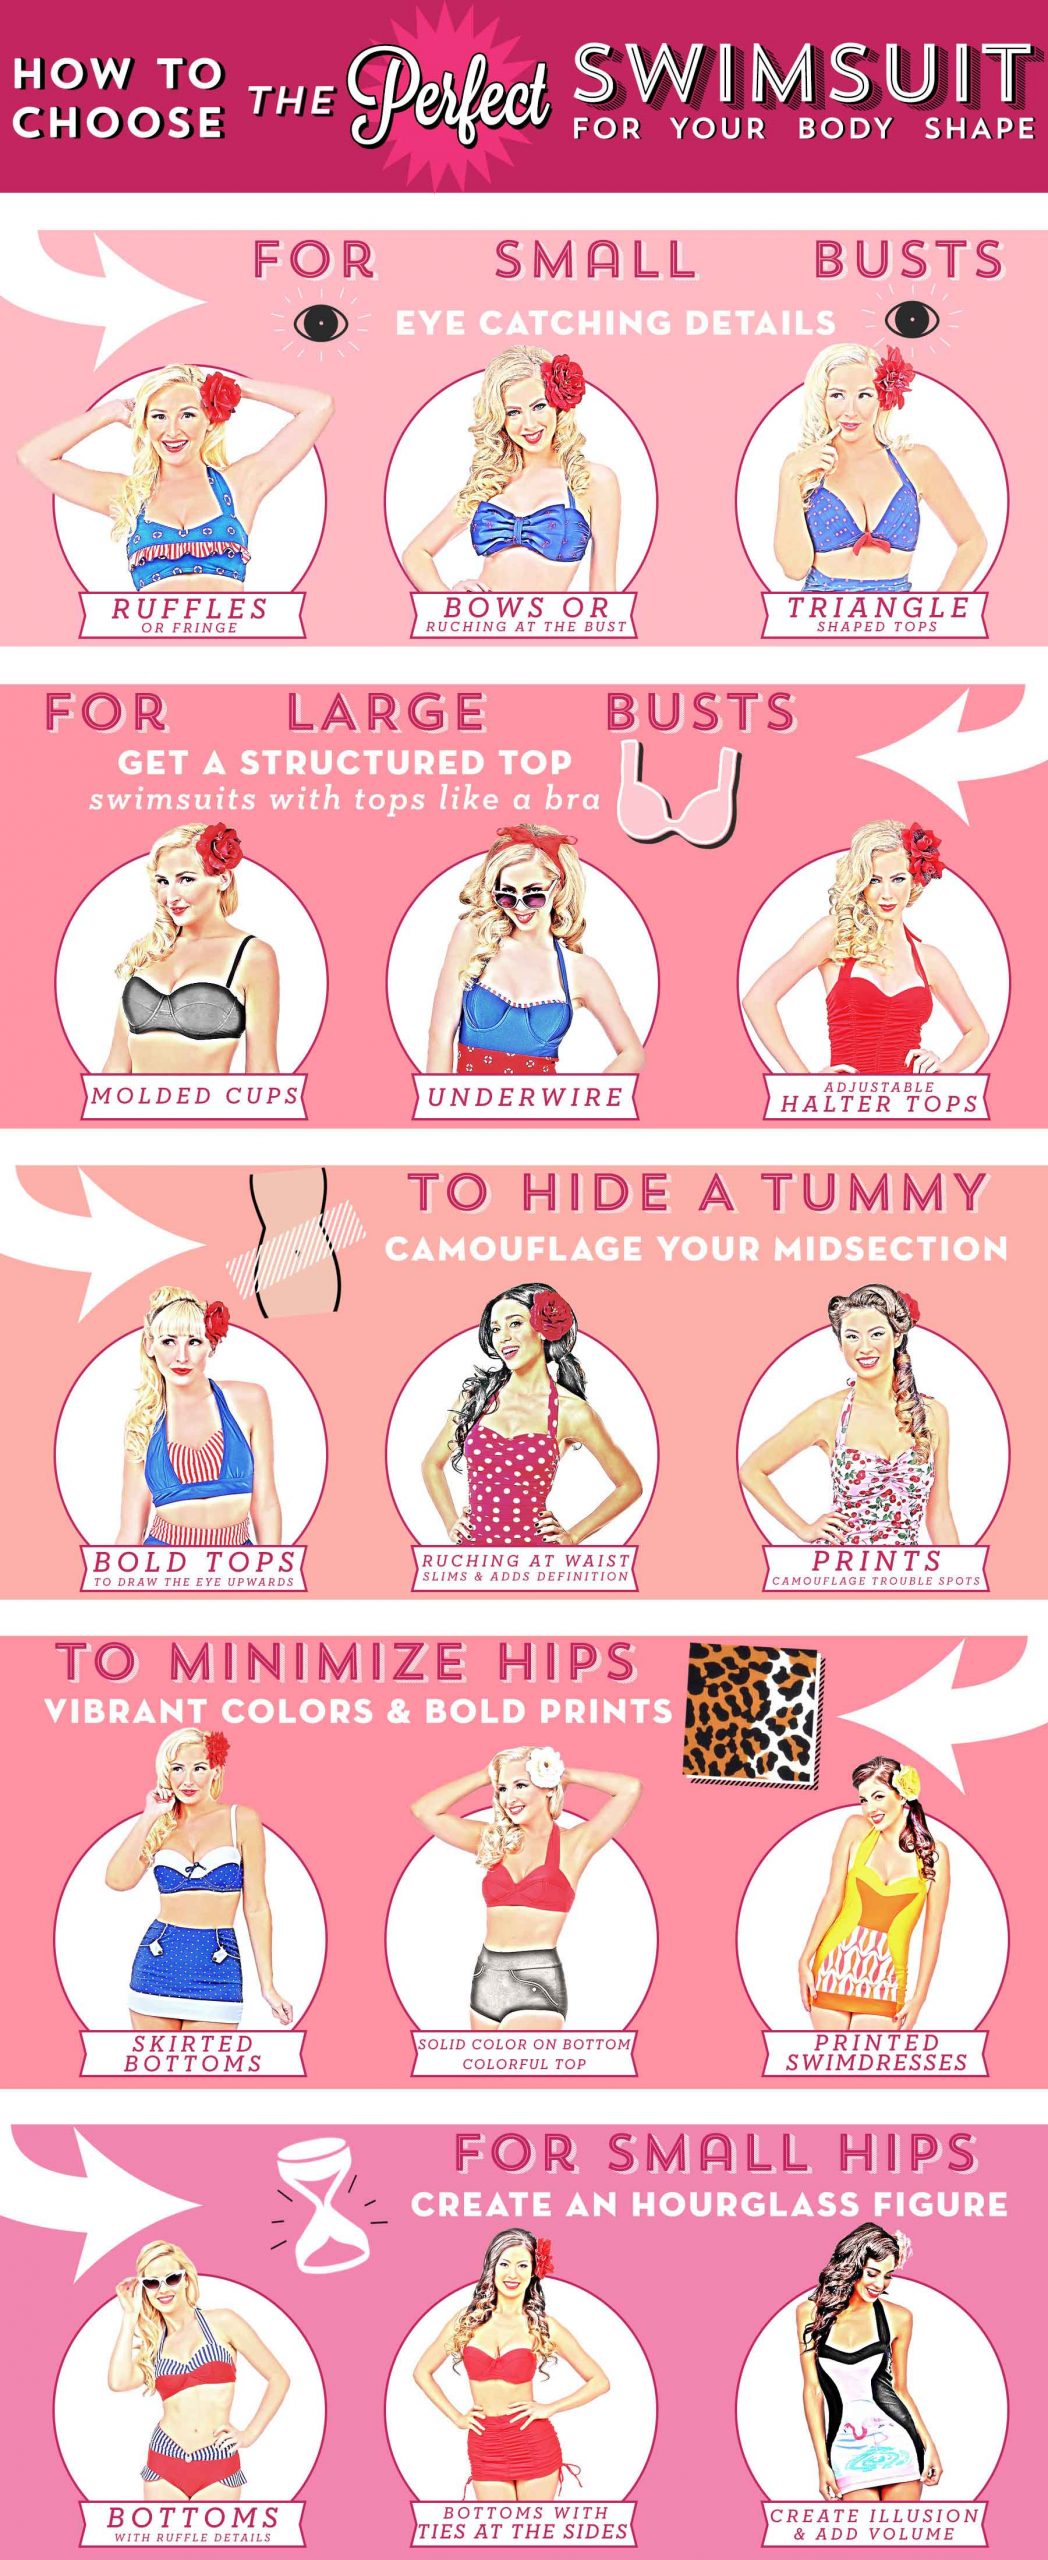 HowTo-Choose-The-Perfect-Retro-Swimsuit---Infographic